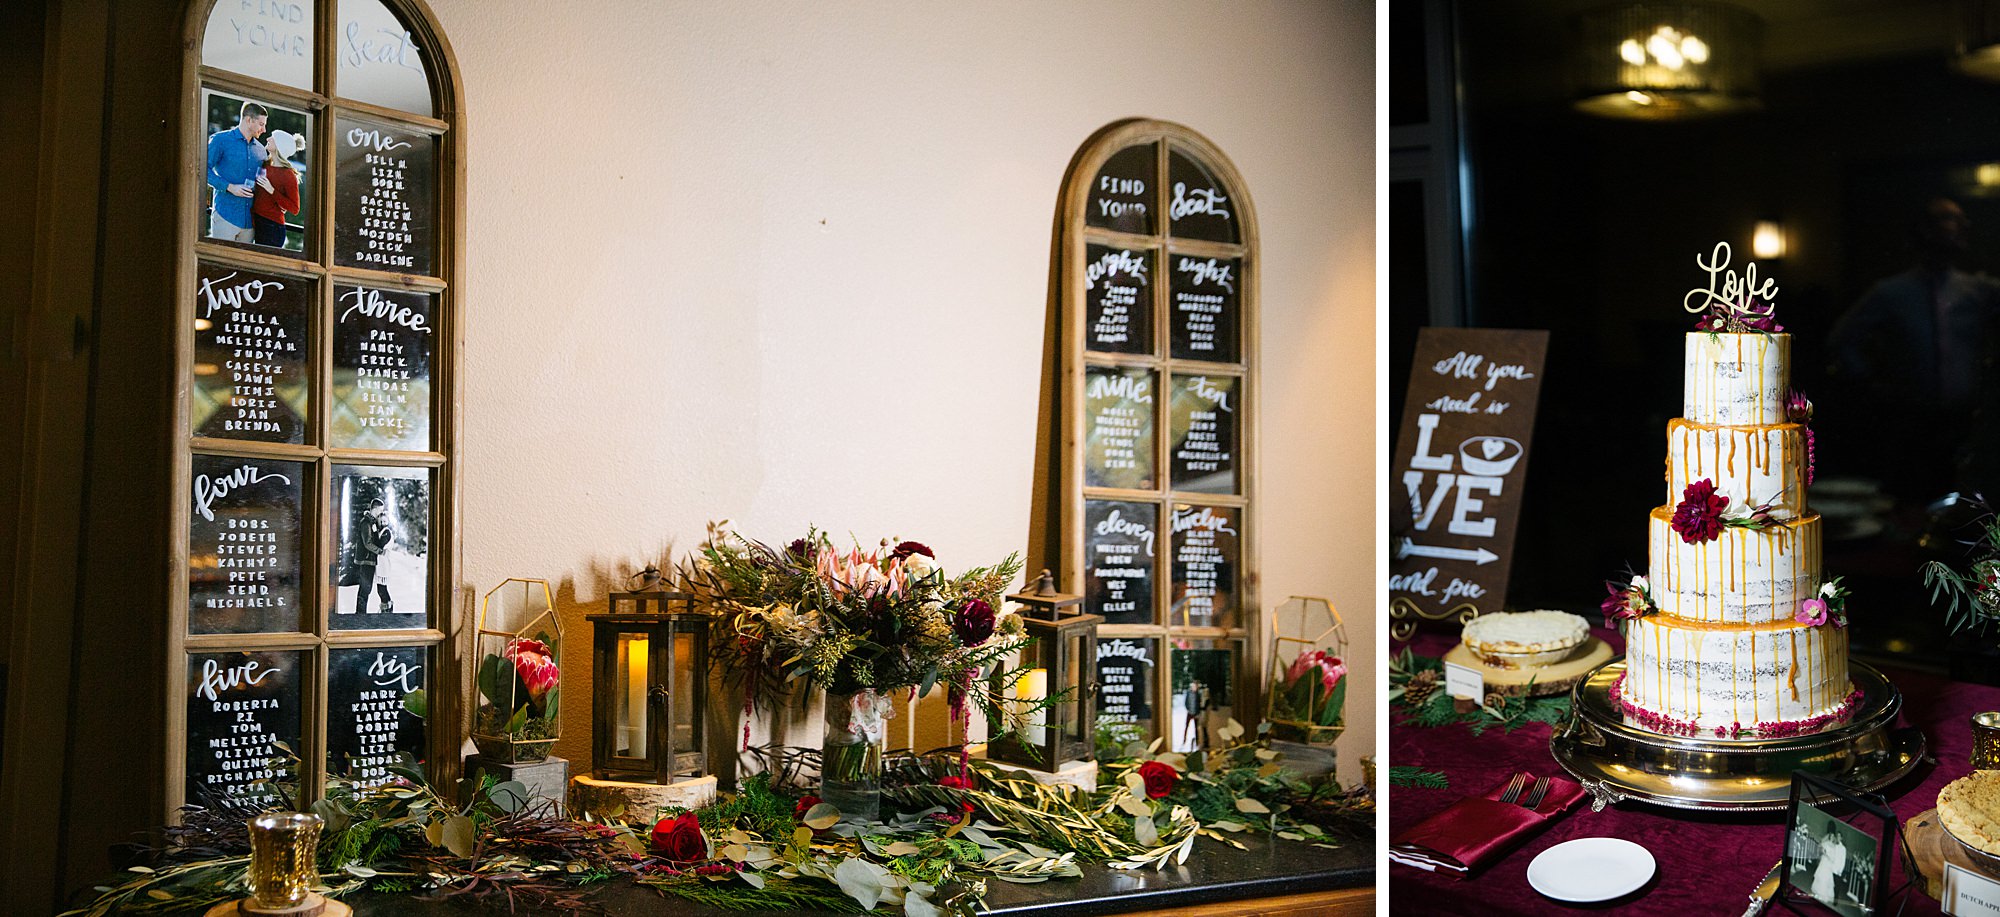 winter wedding deatils welcome table with greenery and burgundy flowers